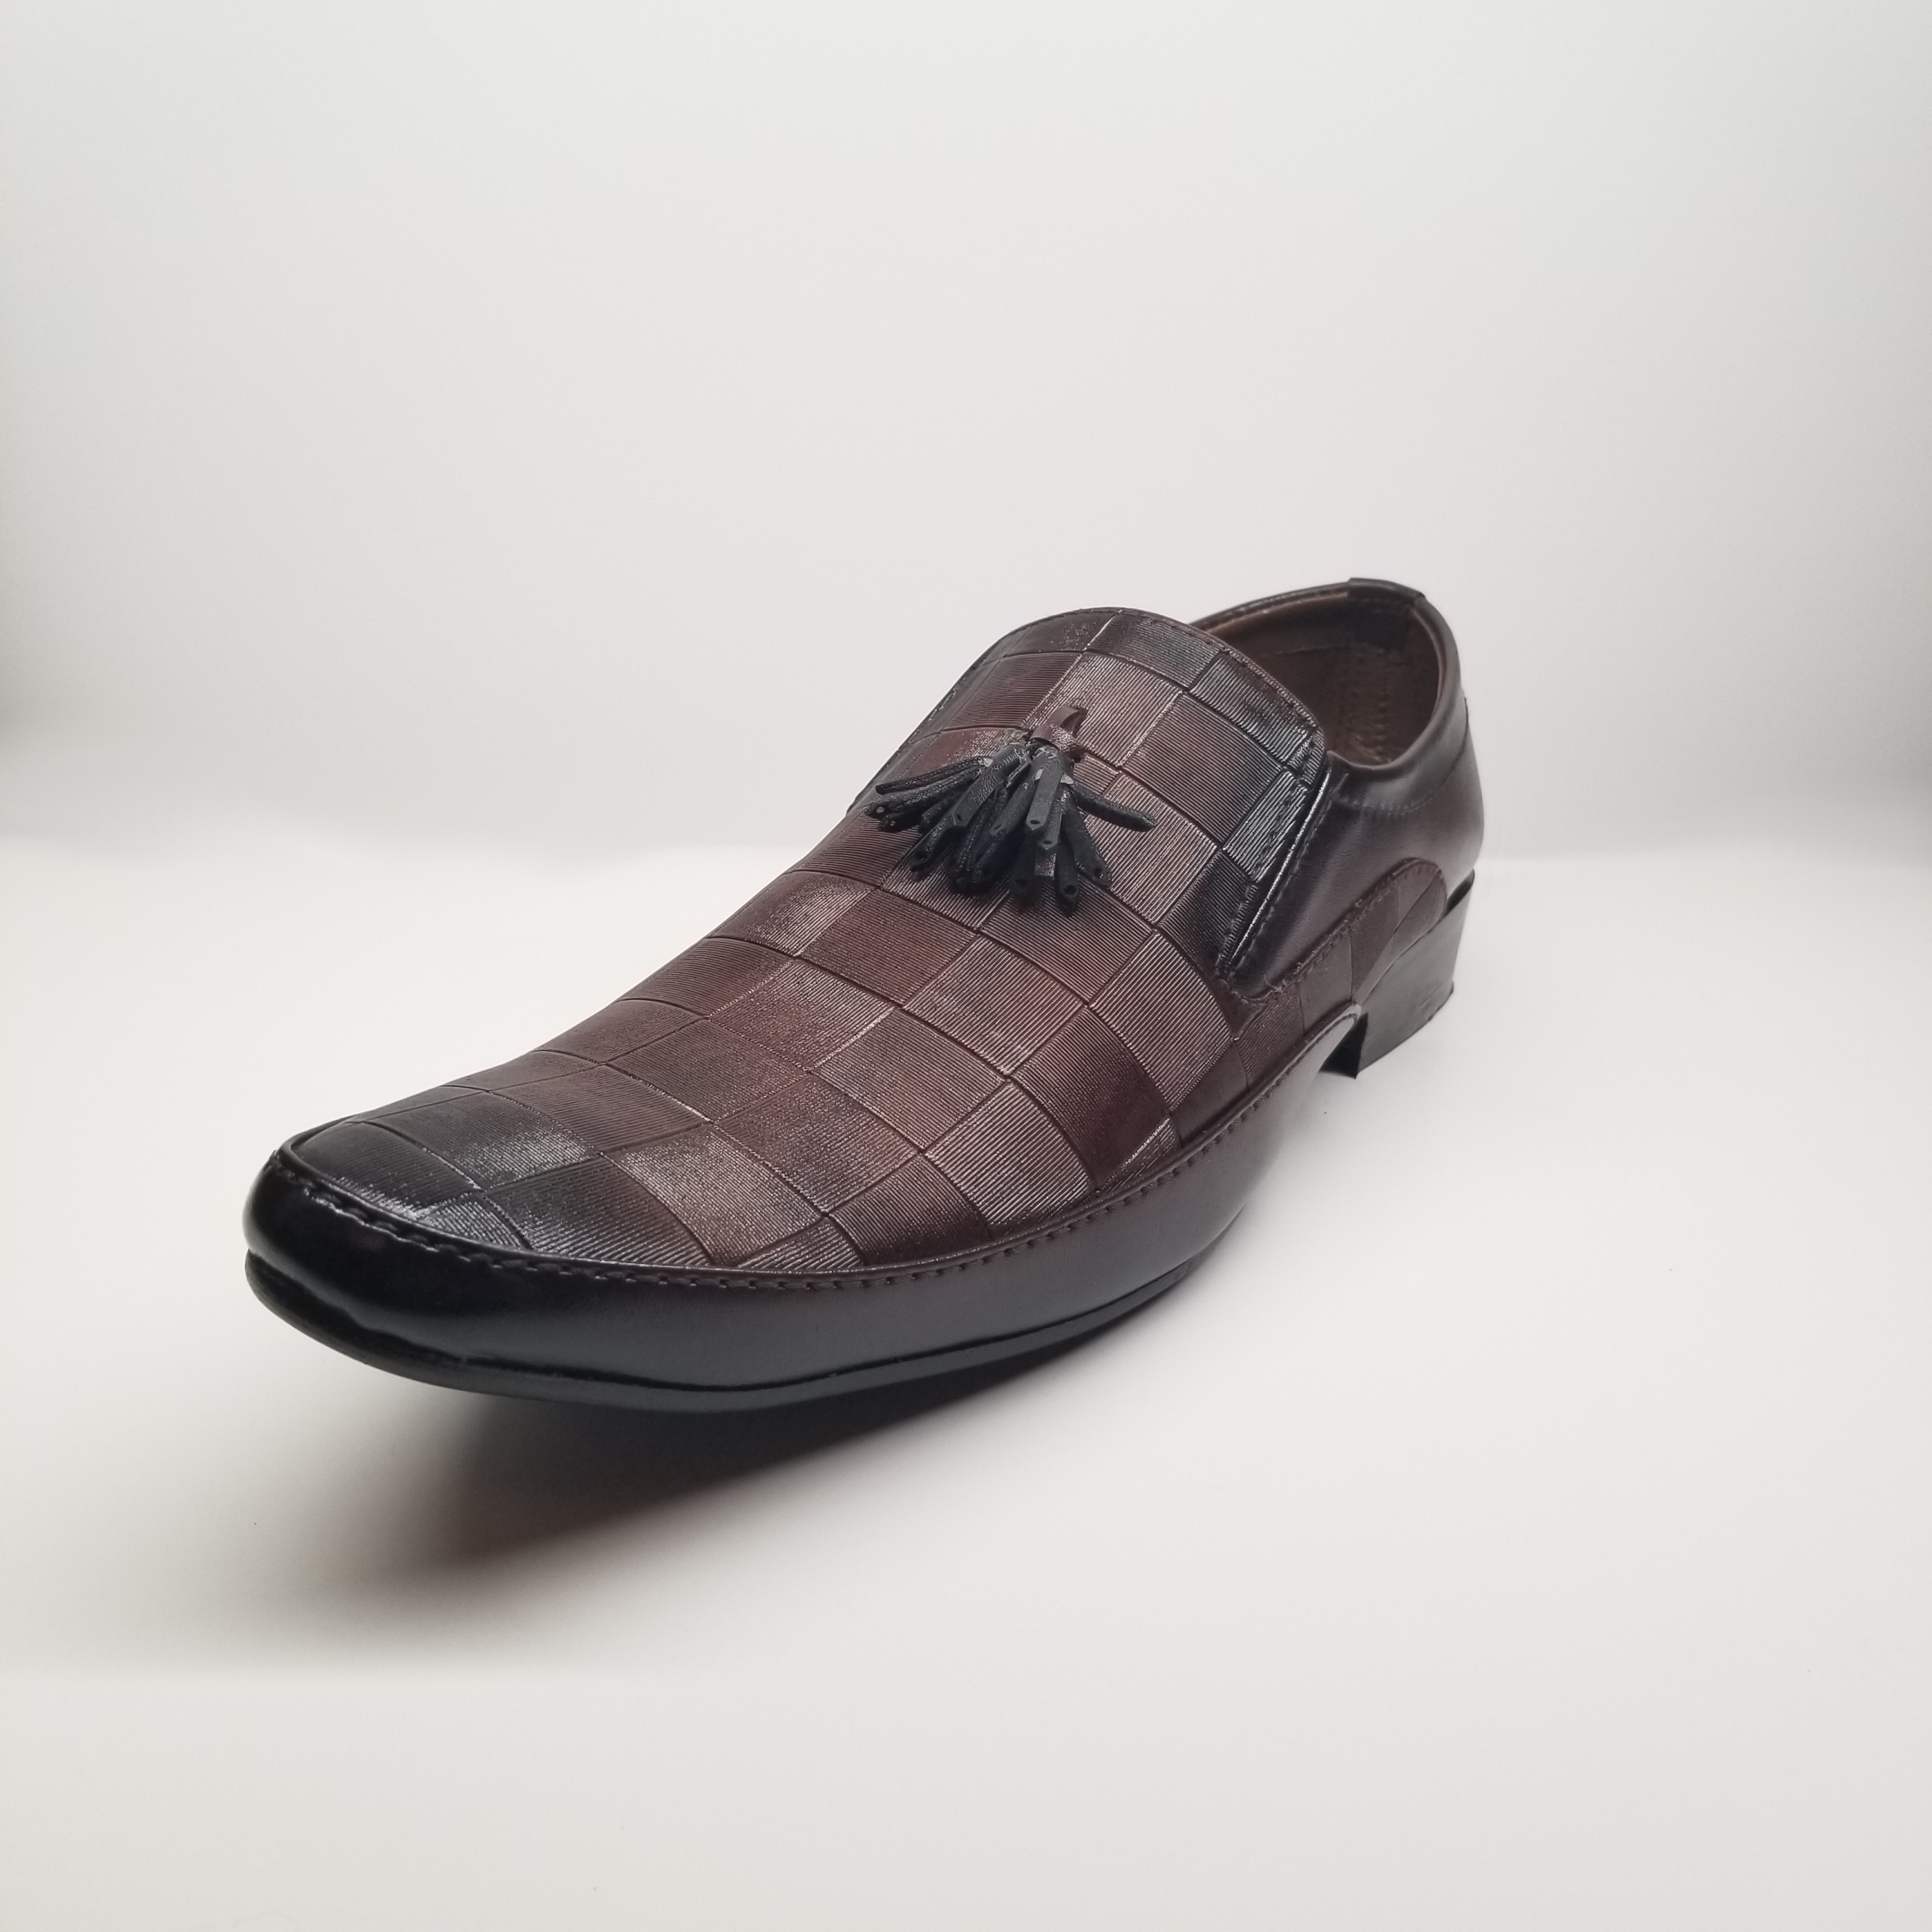 Executive dress shoes by Walkies at NMFootwear.com